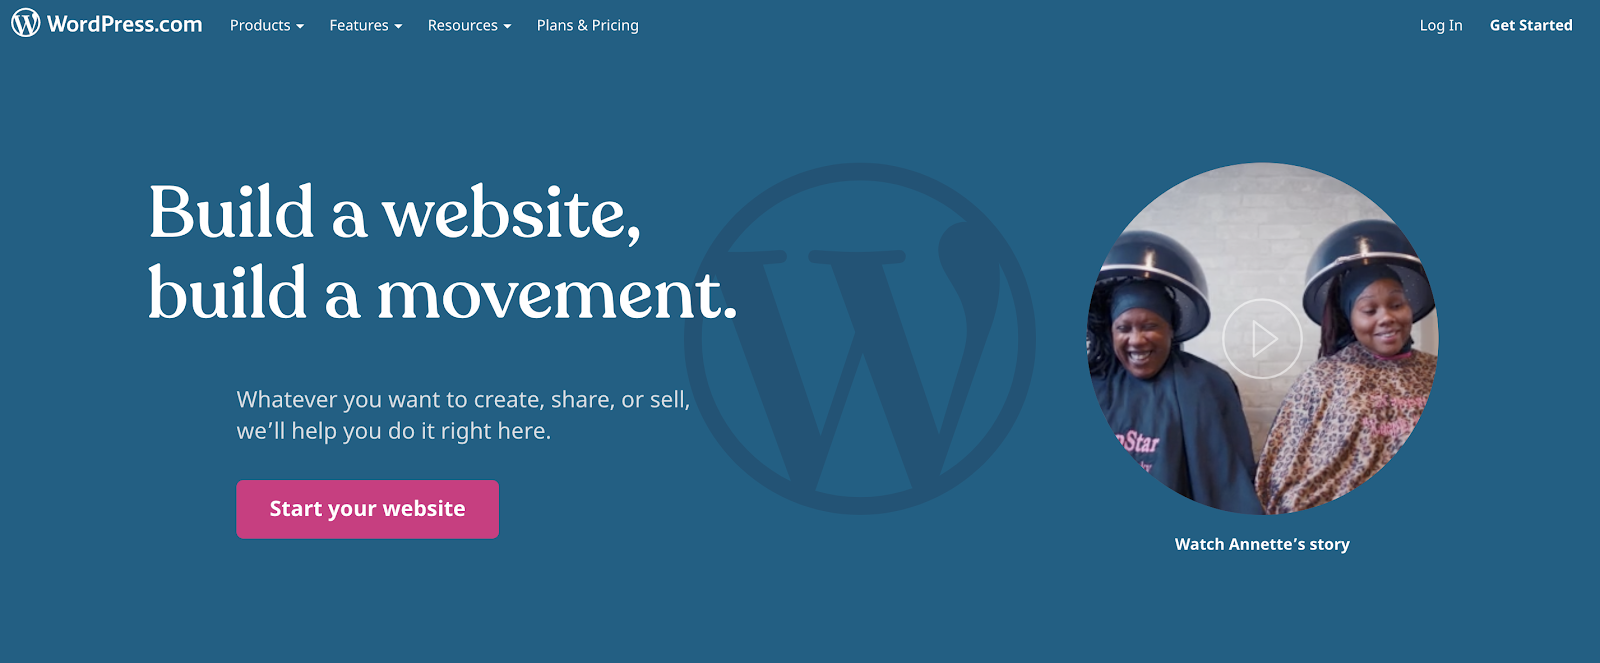 WordPress Dot Com as a Top Free Blogging Site to Use